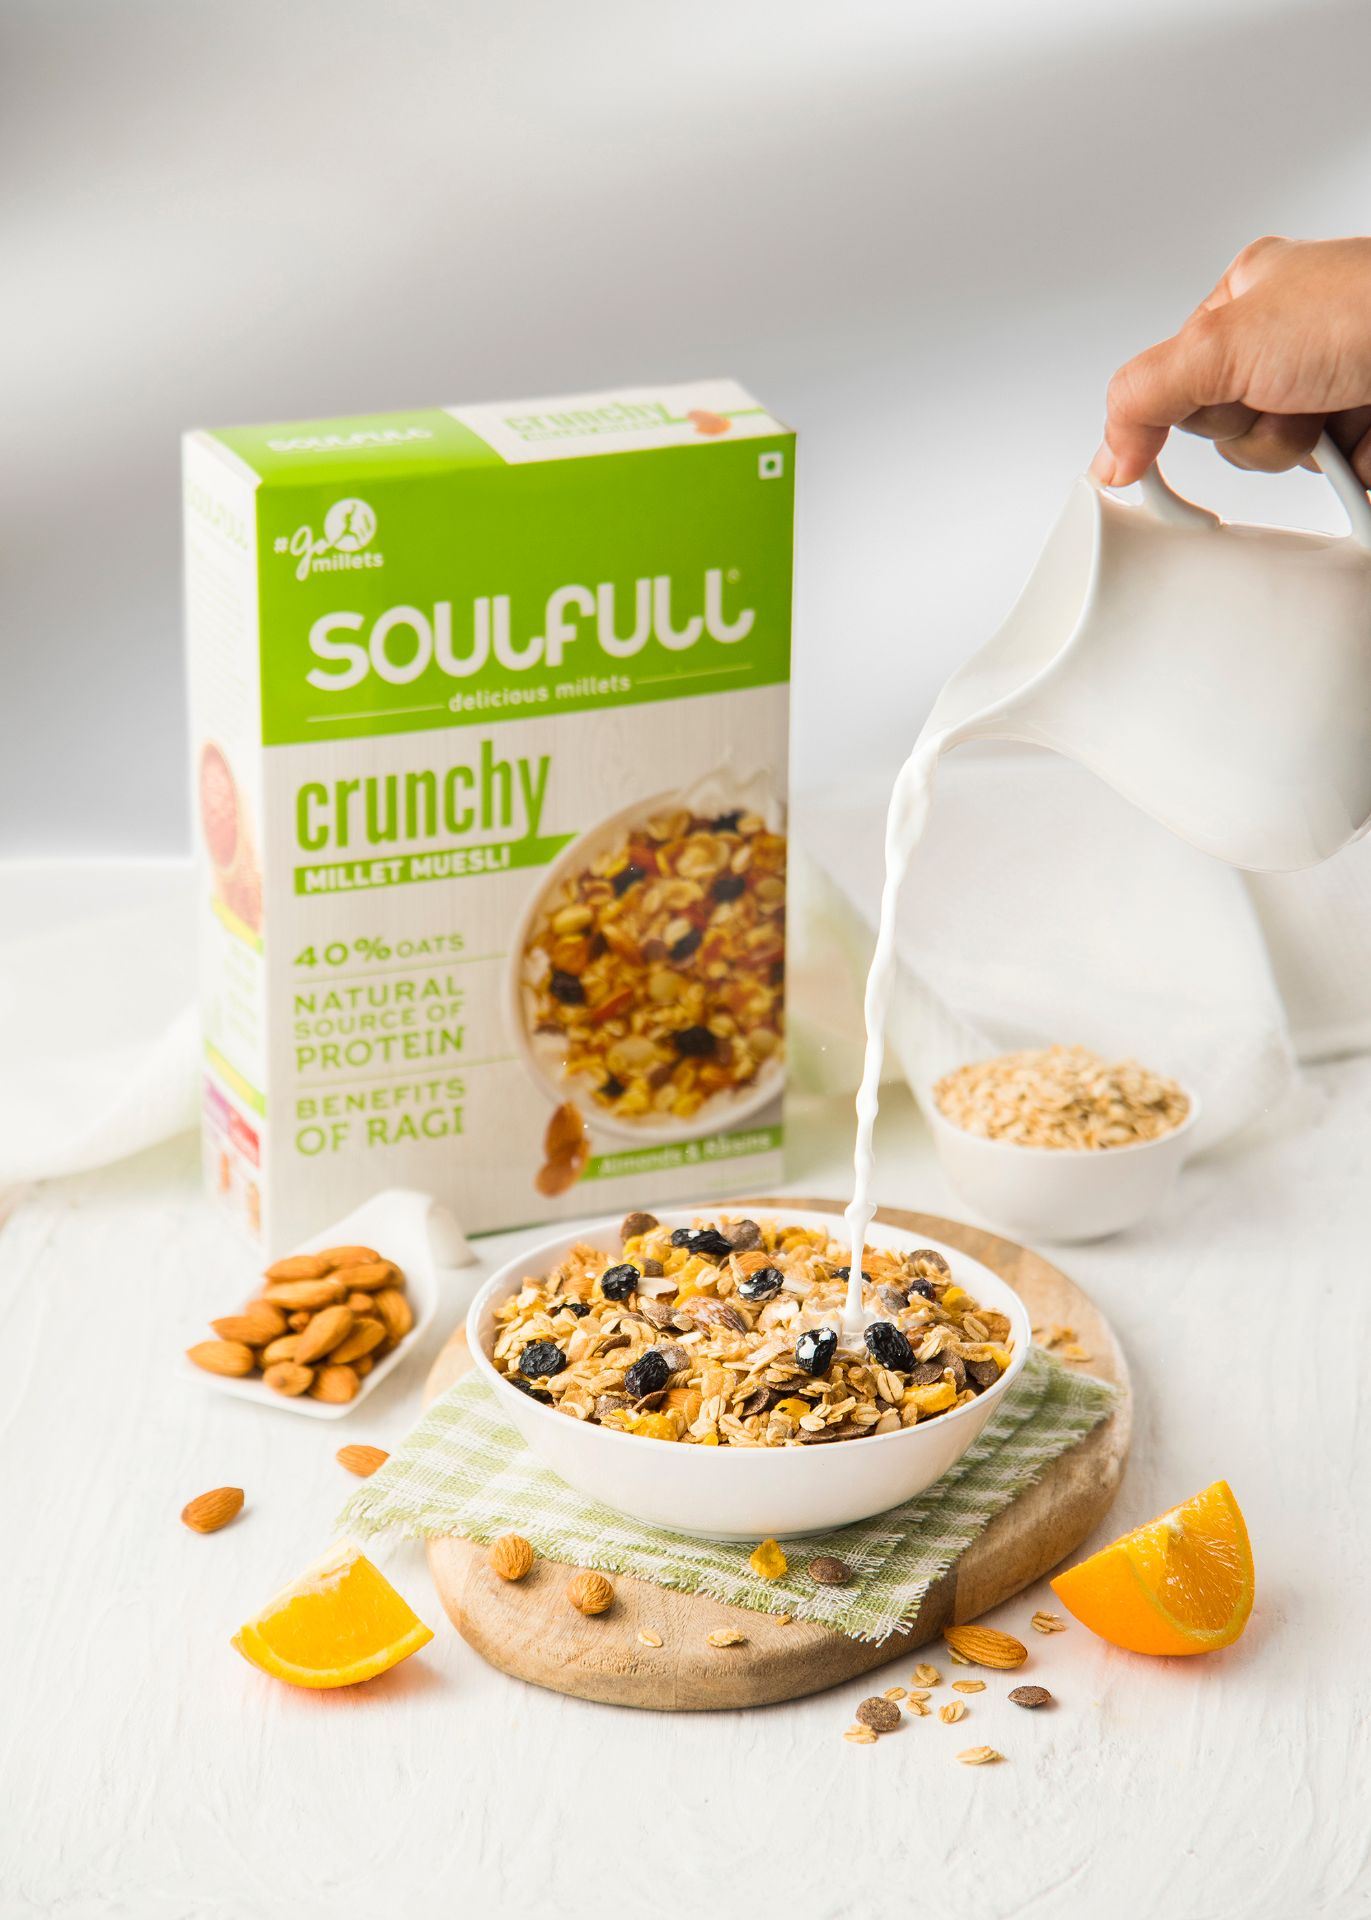 Soulfull Product Photography